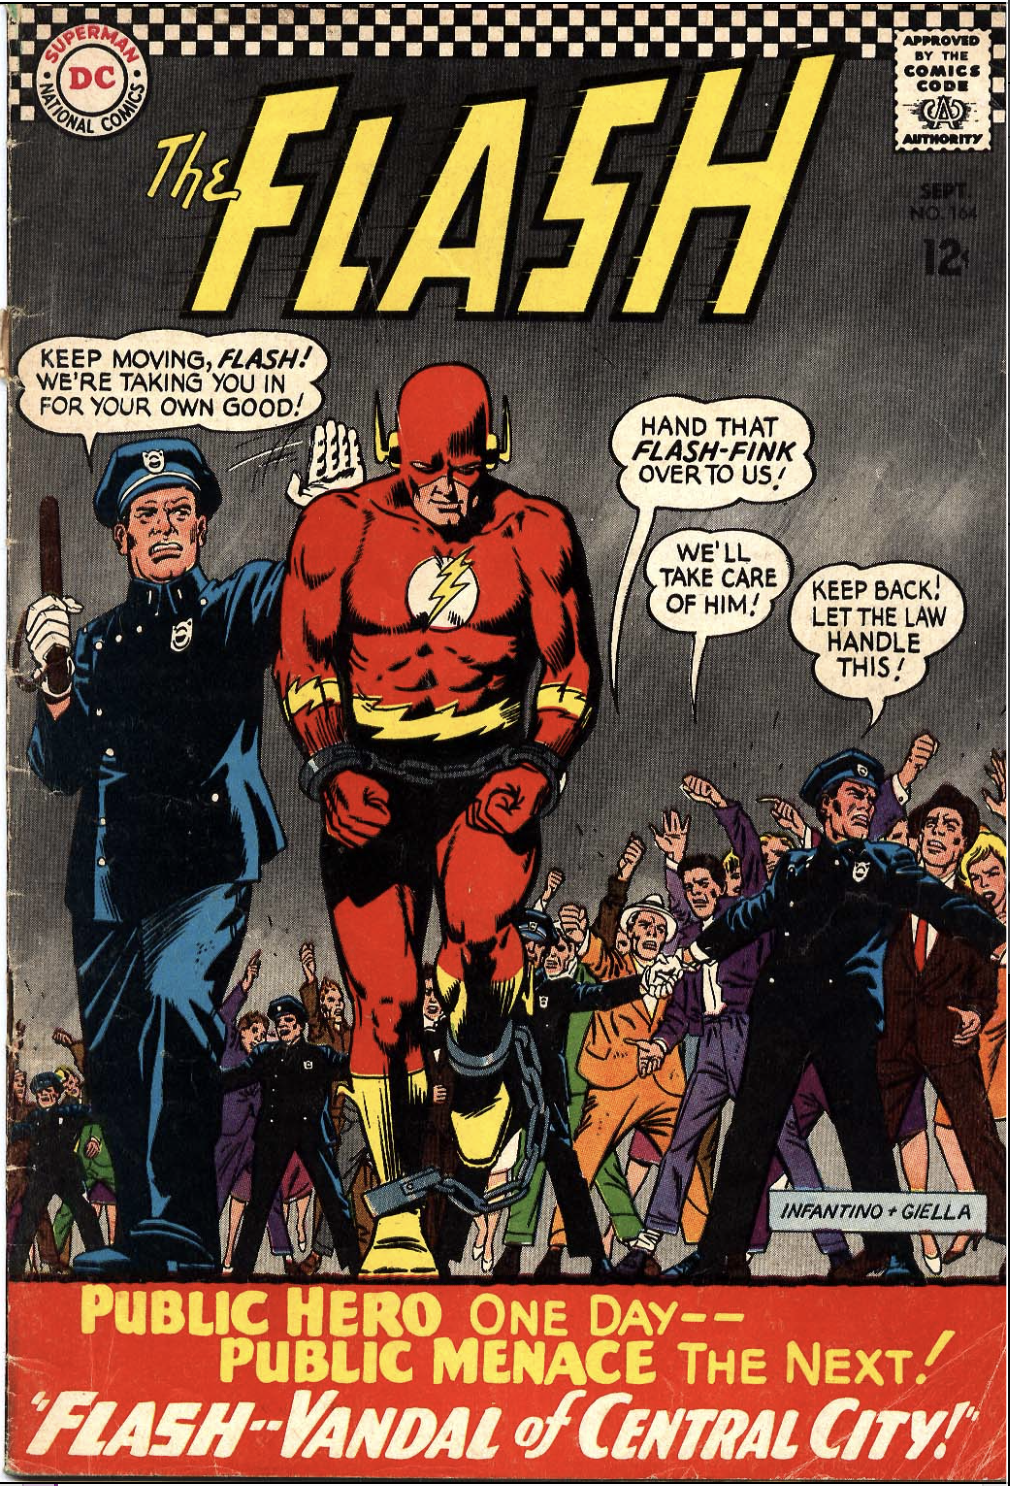 Man About Town (Flash #164)